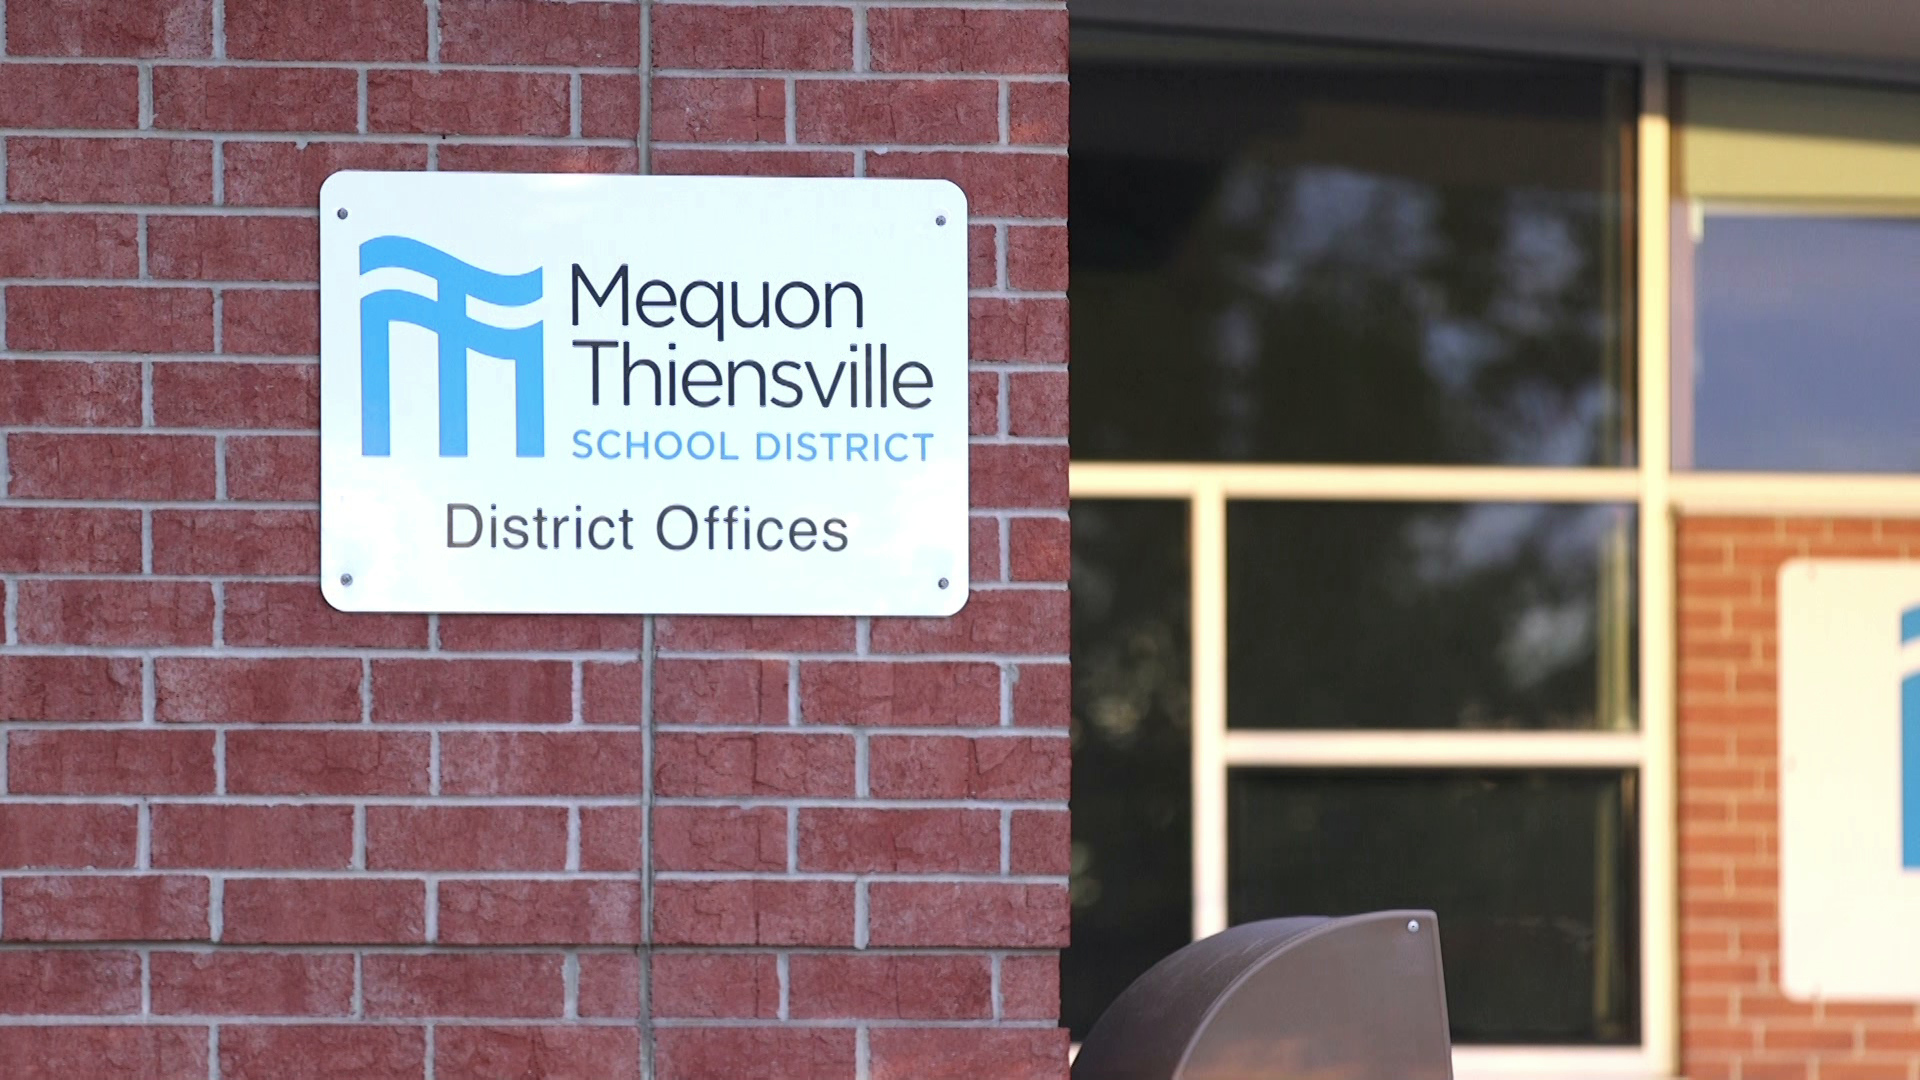 A sign on a brick wall reads "Mequon Thiensville School District - District Offices"